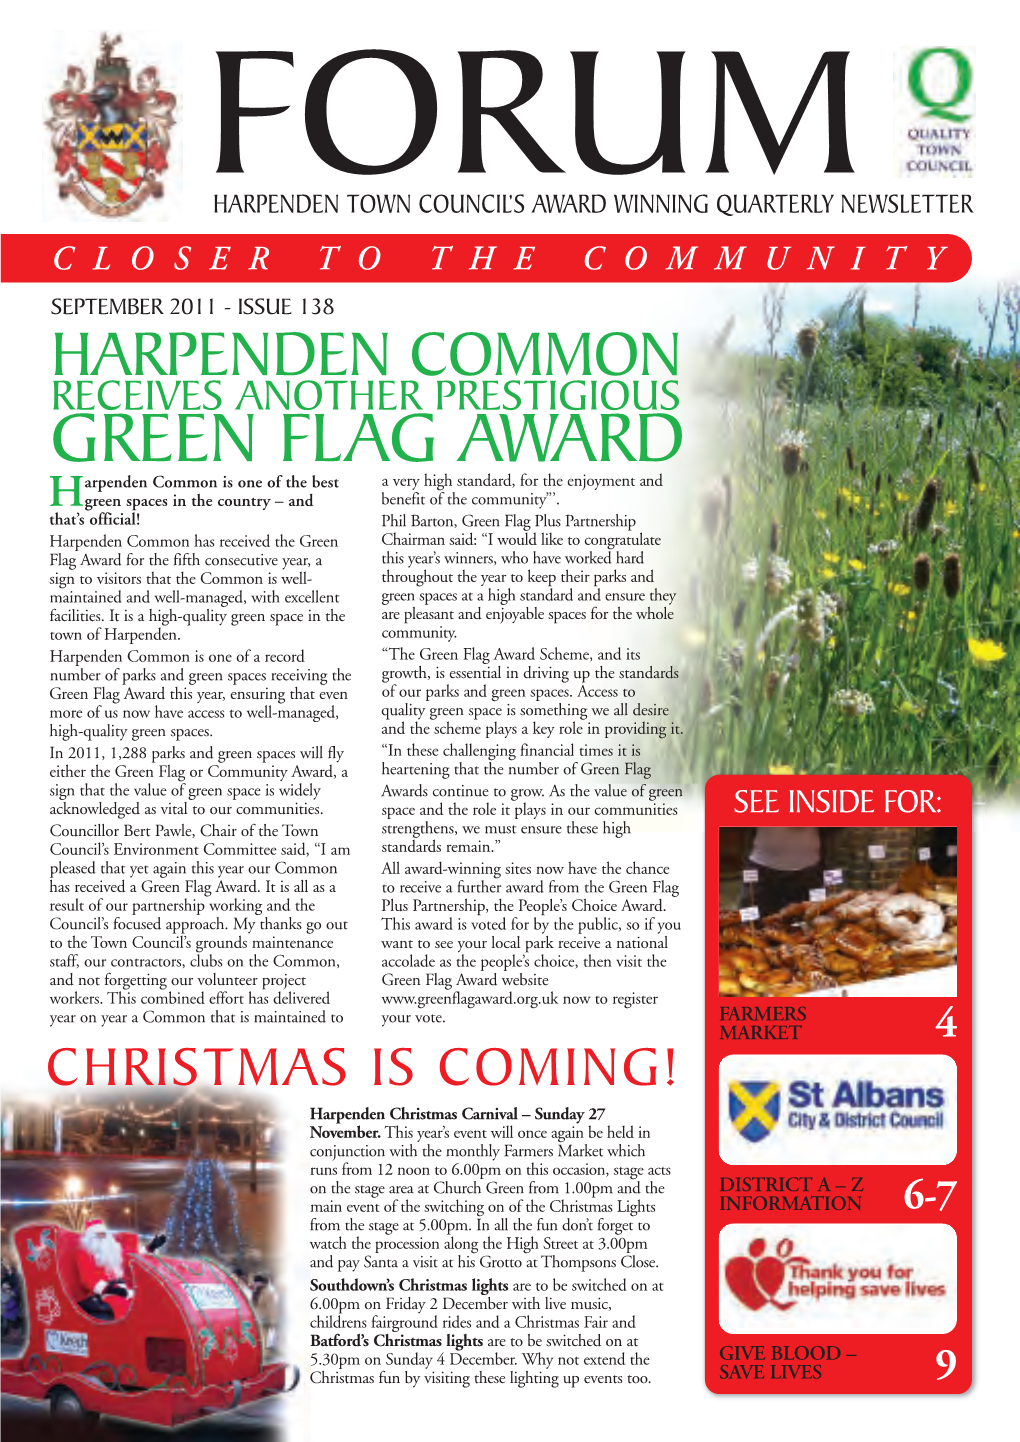 GREEN FLAG AWARD Arpenden Common Is One of the Best a Very High Standard, for the Enjoyment and Hgreen Spaces in the Country – and Benefit of the Community”’